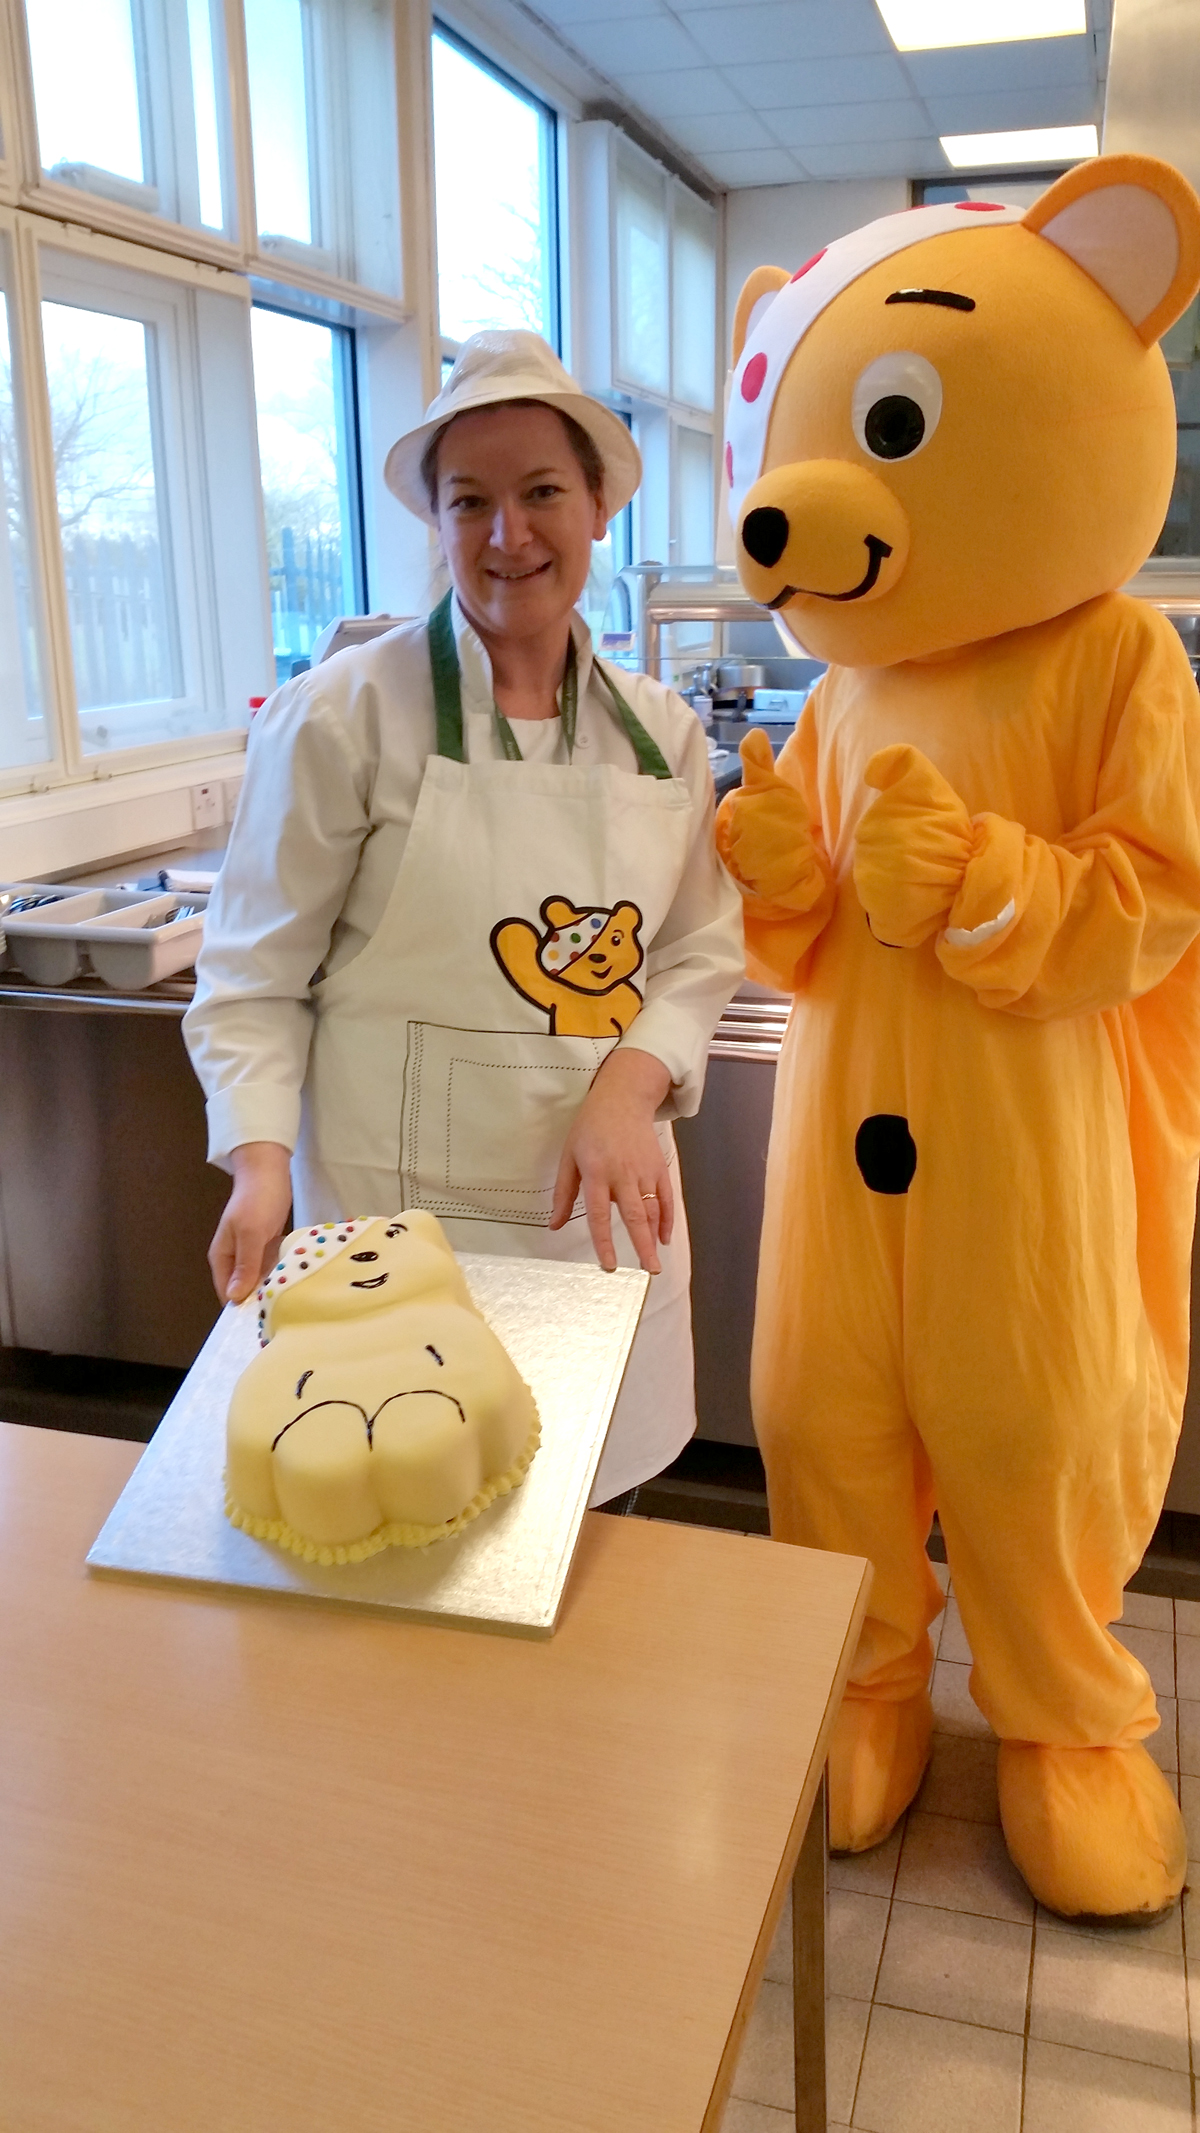 Academy to Raise Funds for Children in Need